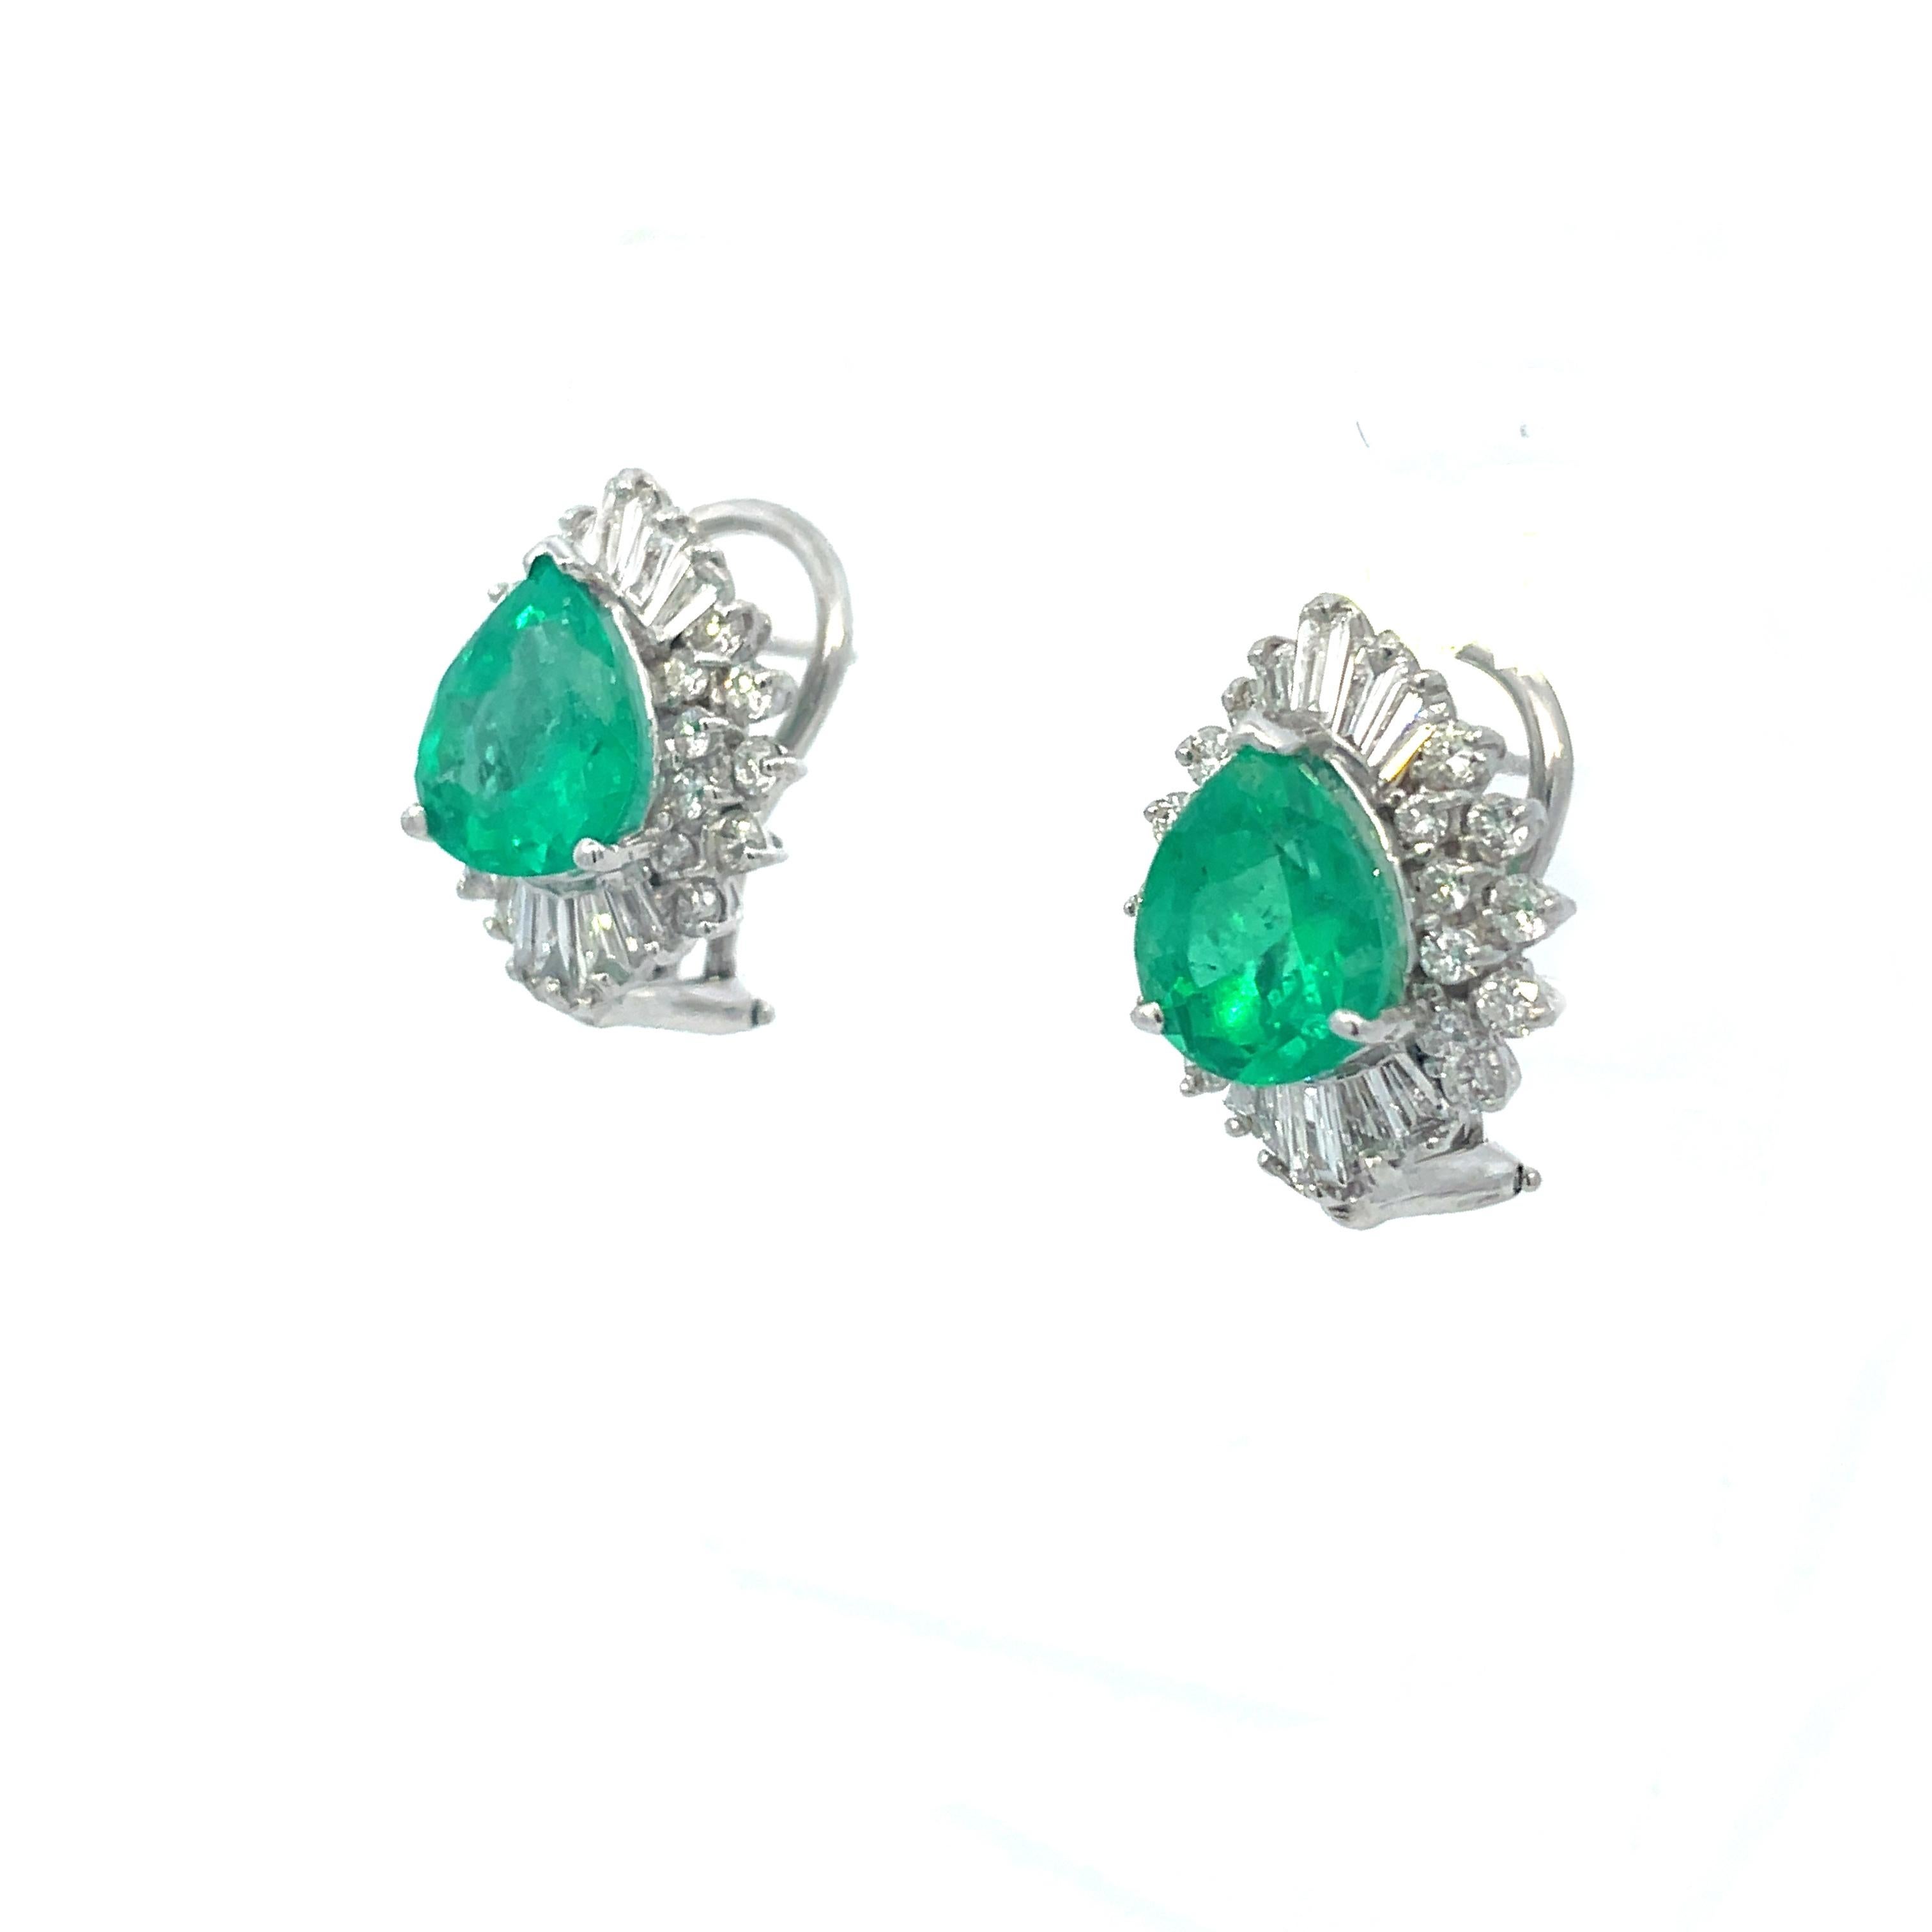 Women's 14K White Gold Pear Shaped Emerald and Diamond Earrings with AGL Report For Sale